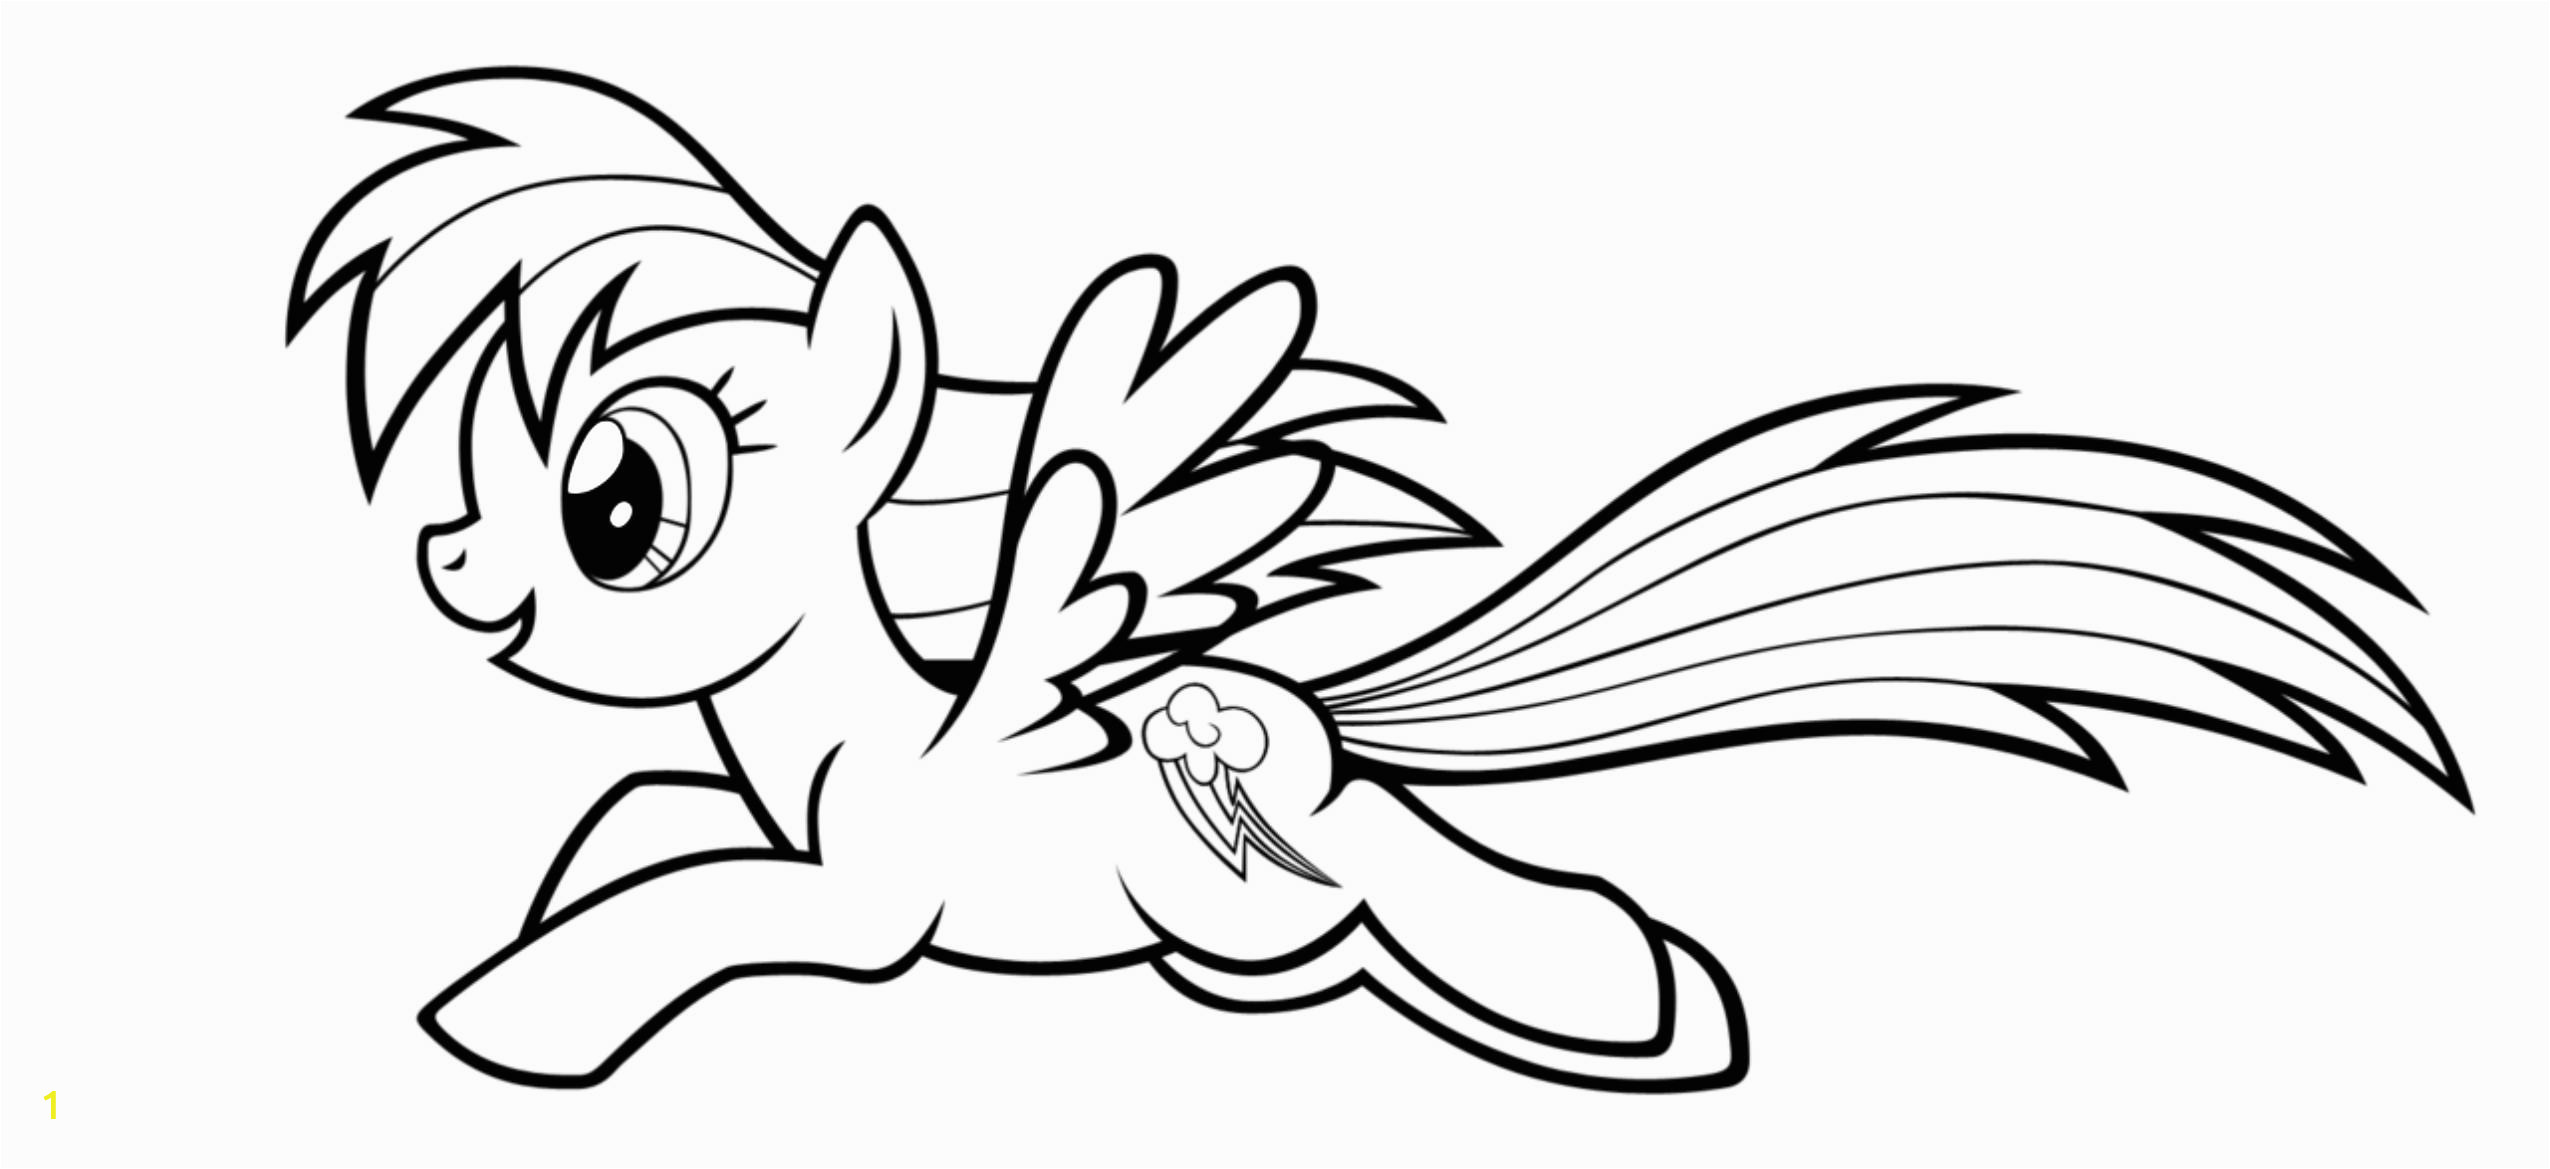 colorful rainbow dash coloring pages extend kids imagination